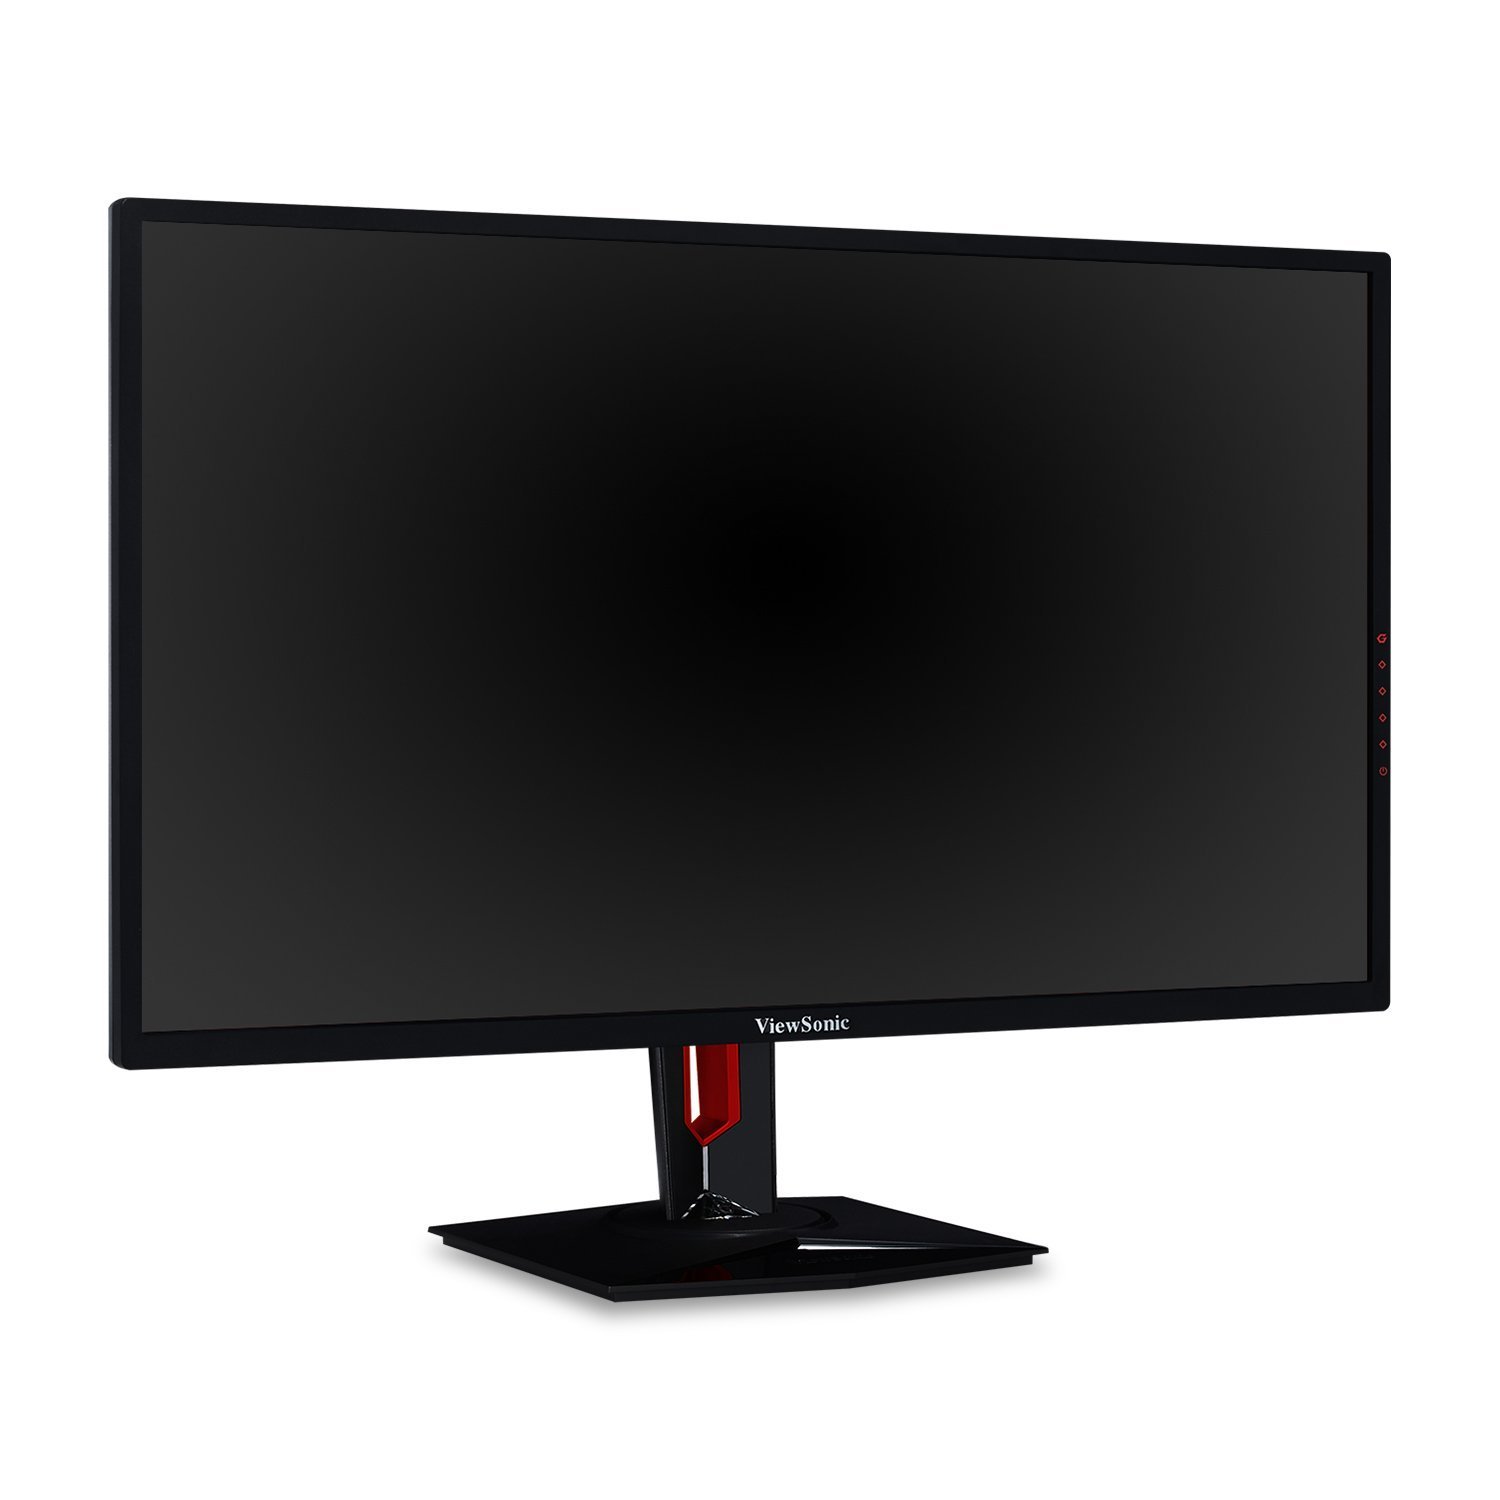 Review: ViewSonic XG3220 4K Gaming Monitor — The complete package